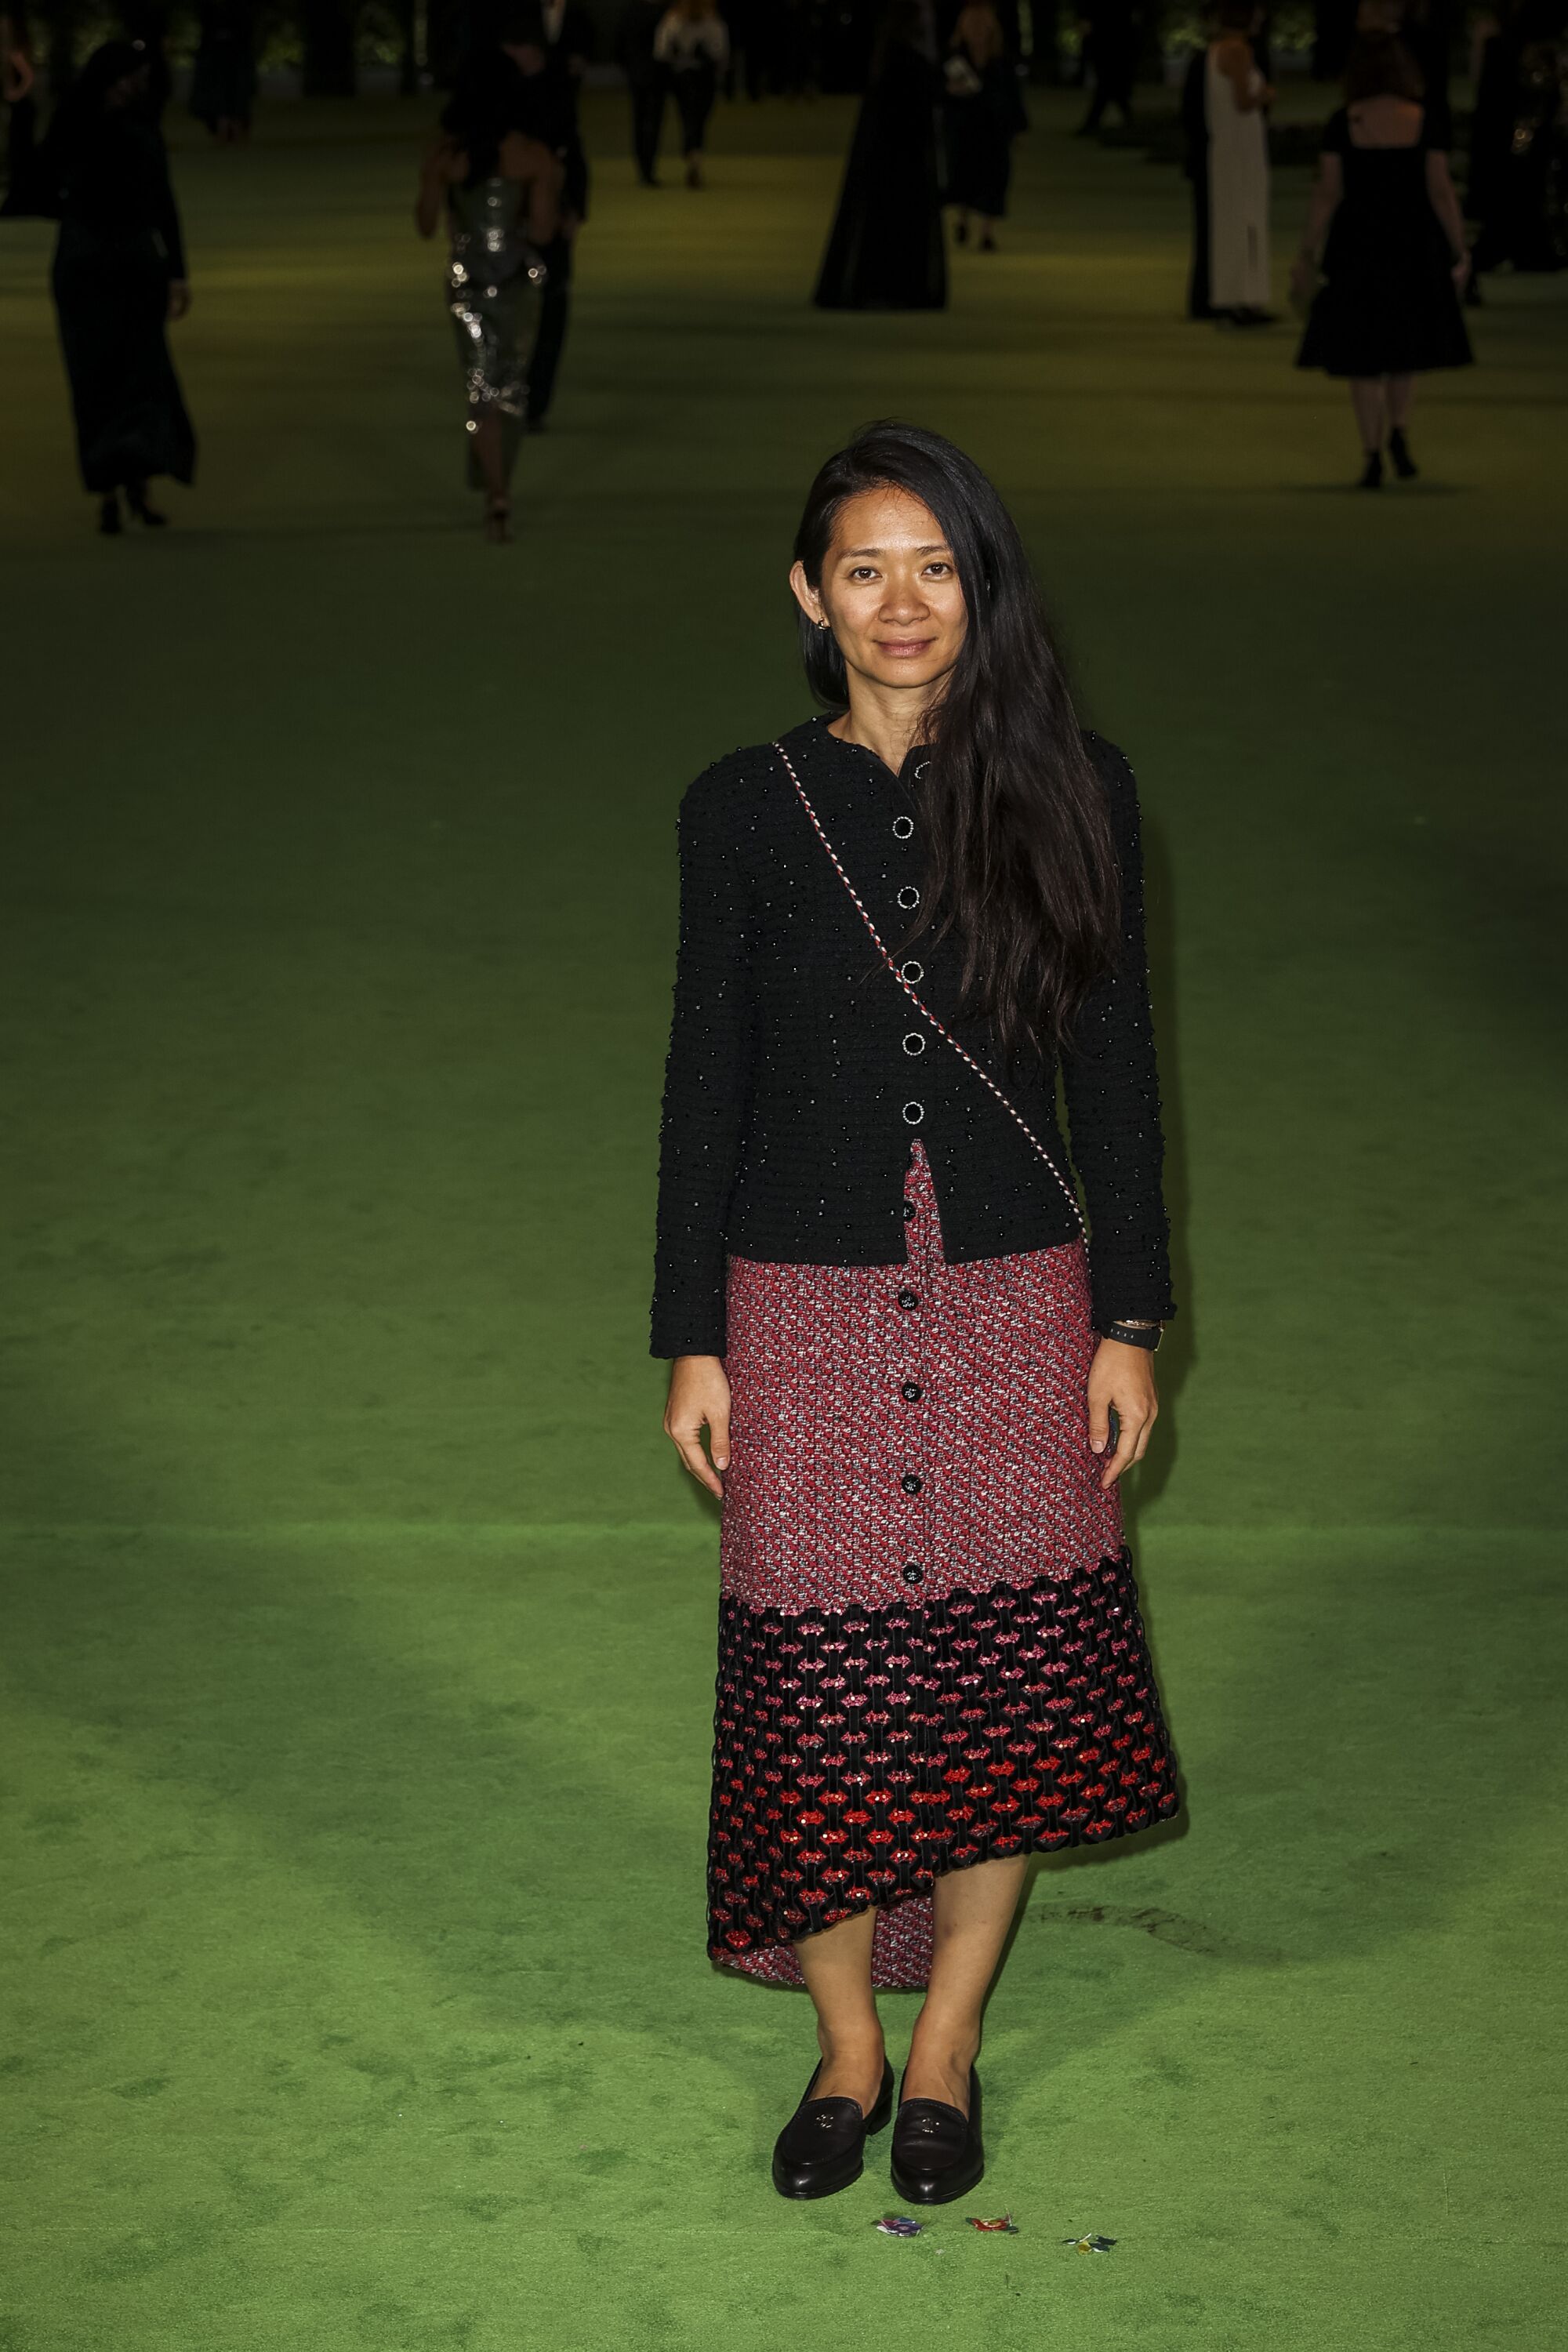 A woman in a black, button-down shirt and pink skirt posing on a green carpet